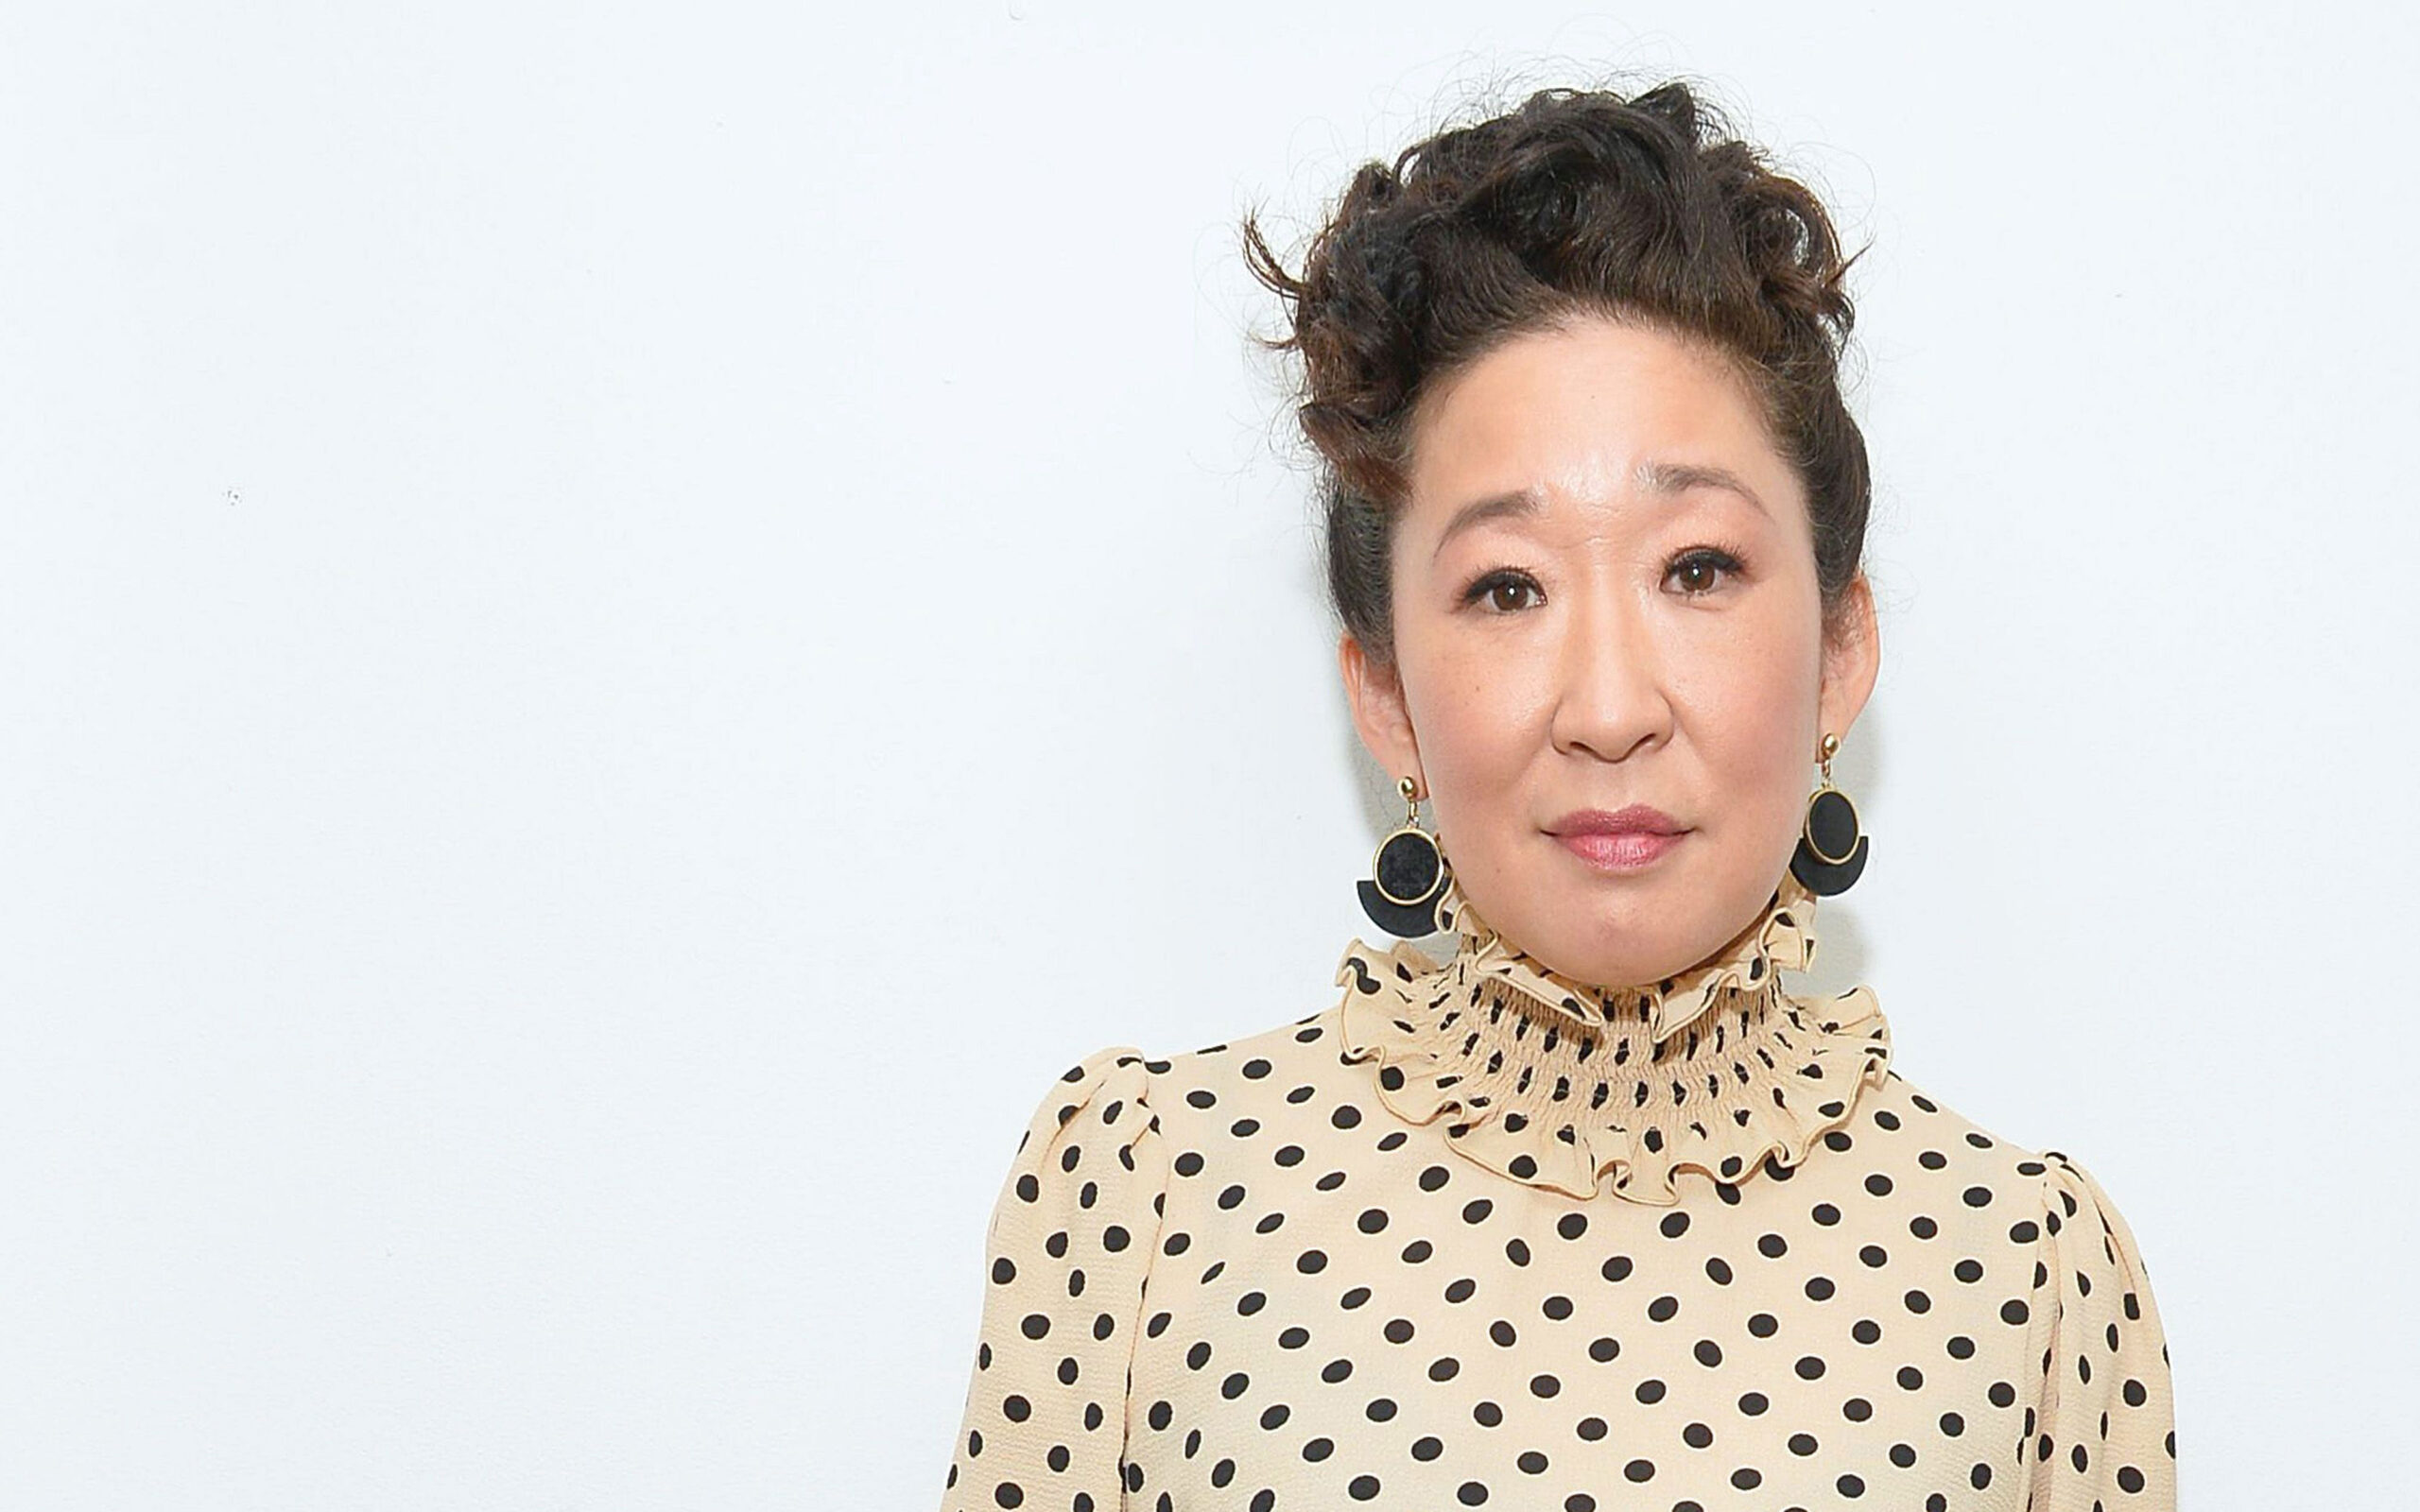 sandra-oh-gave-an-impassioned-speech-at-a-stop-asian-hate-protest